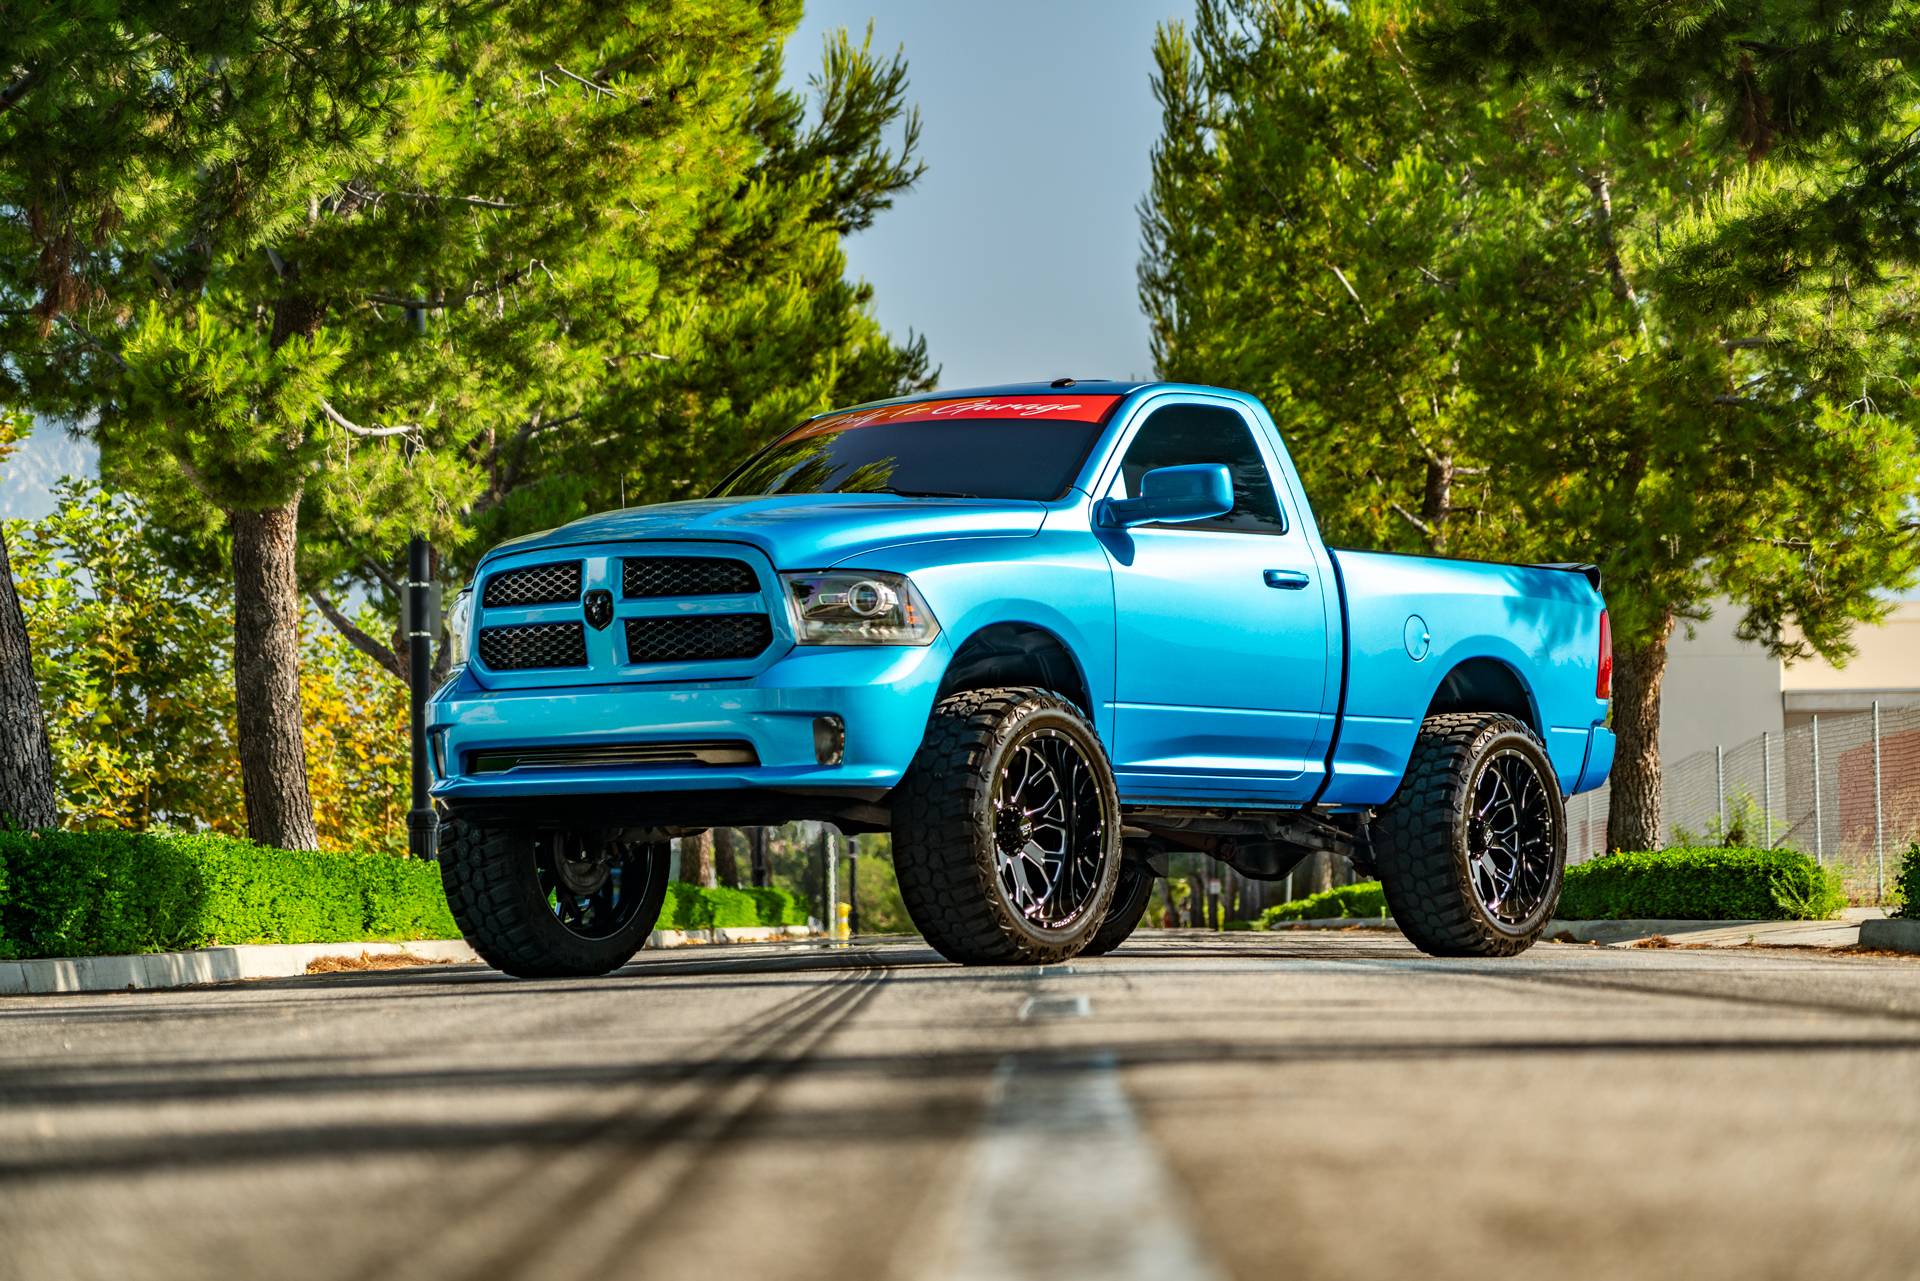 HardRock Offroad Aftermarket Offroad Wheels On a Lifted Dodge RAM 1500